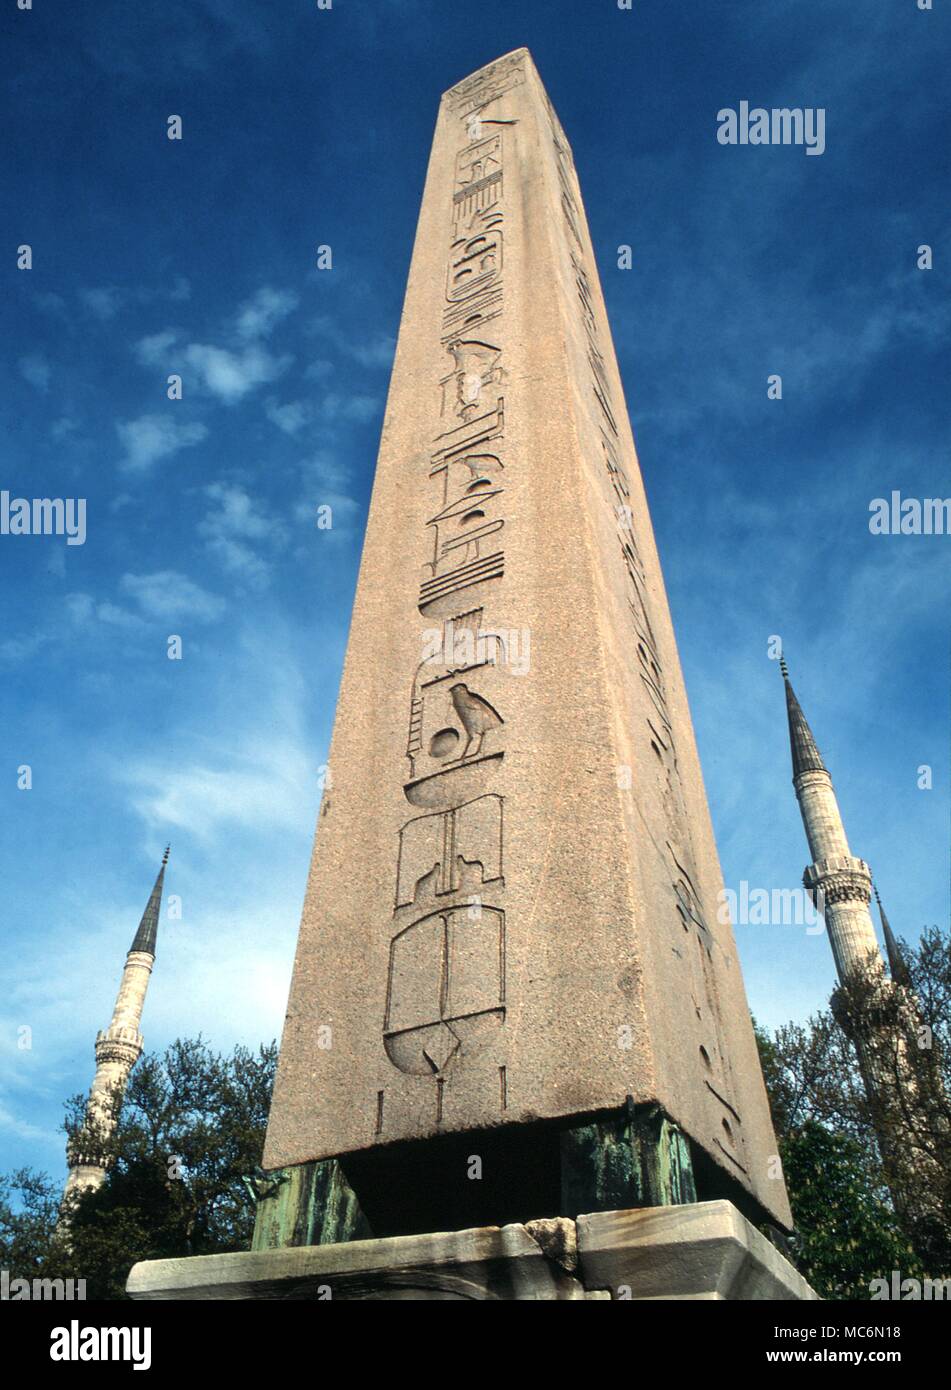 The ancient Egyptian obelisk raised on the Constantine plinth in the Hippodrome at Istanbul. Stock Photo